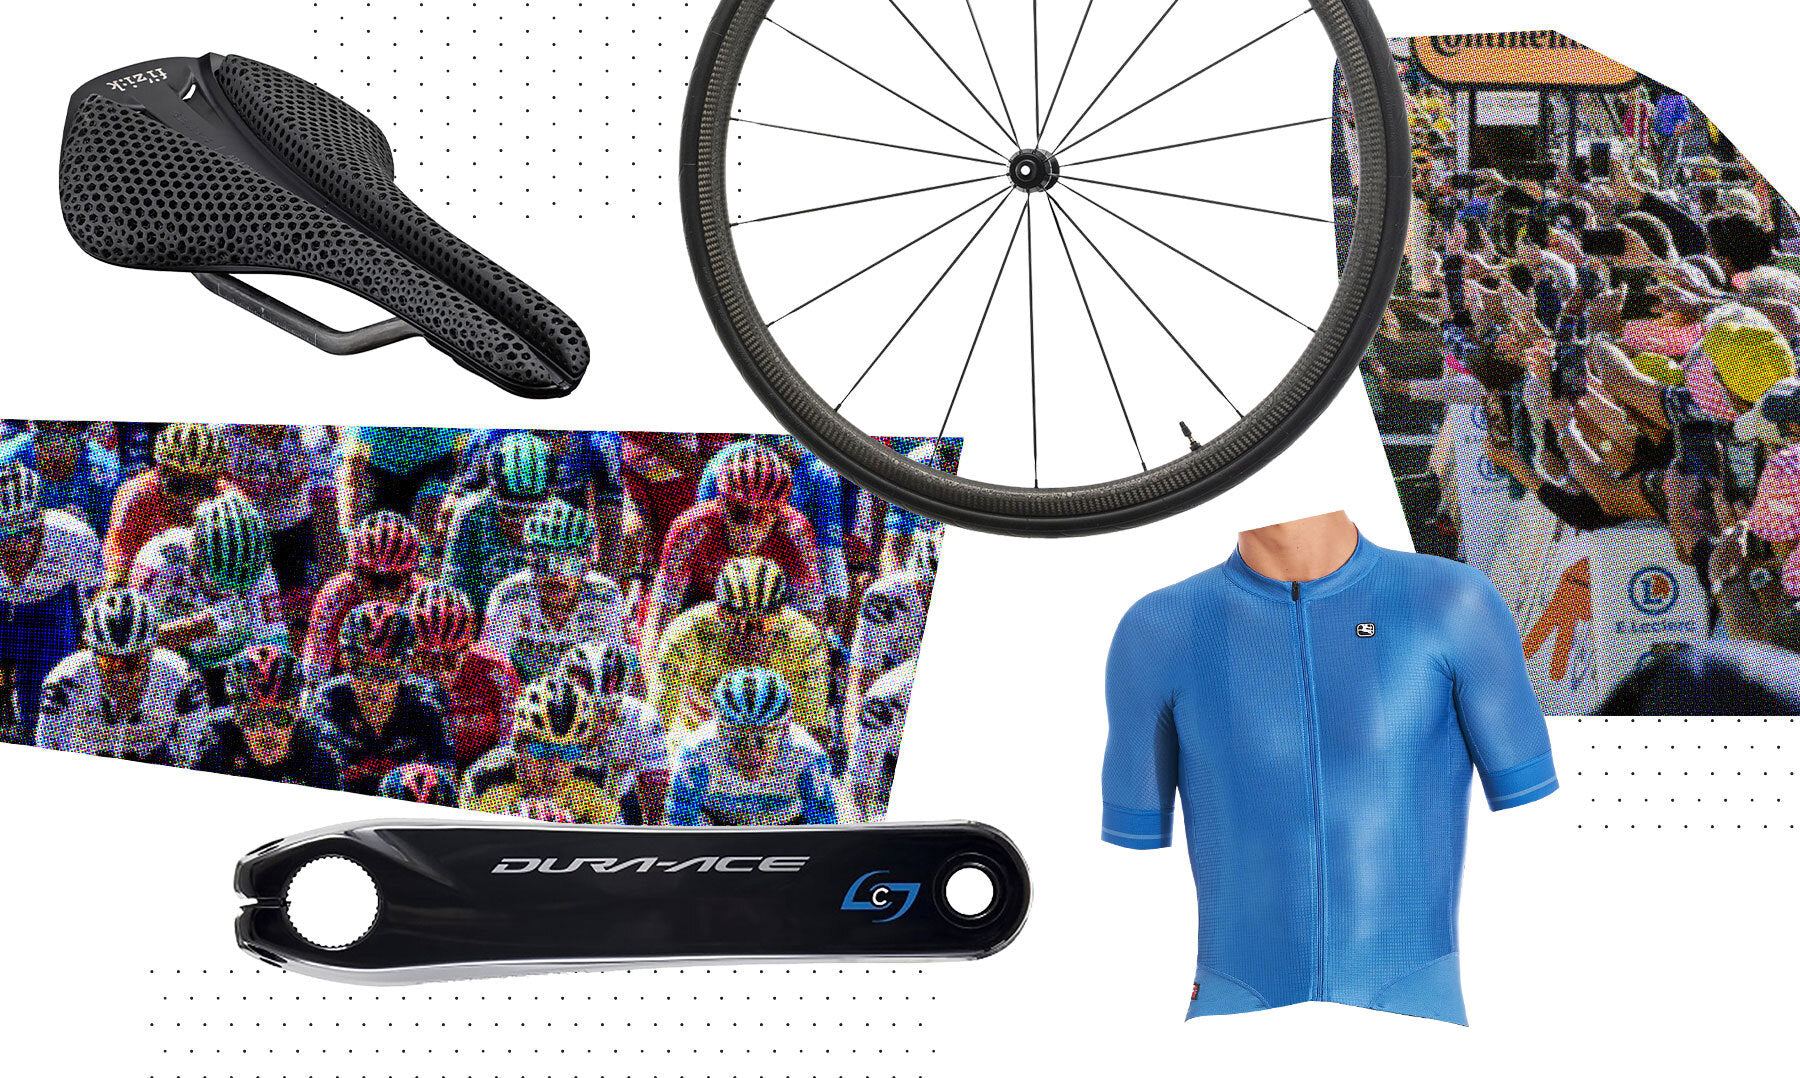 The ultimate guide to pro-Level Tour de France gear